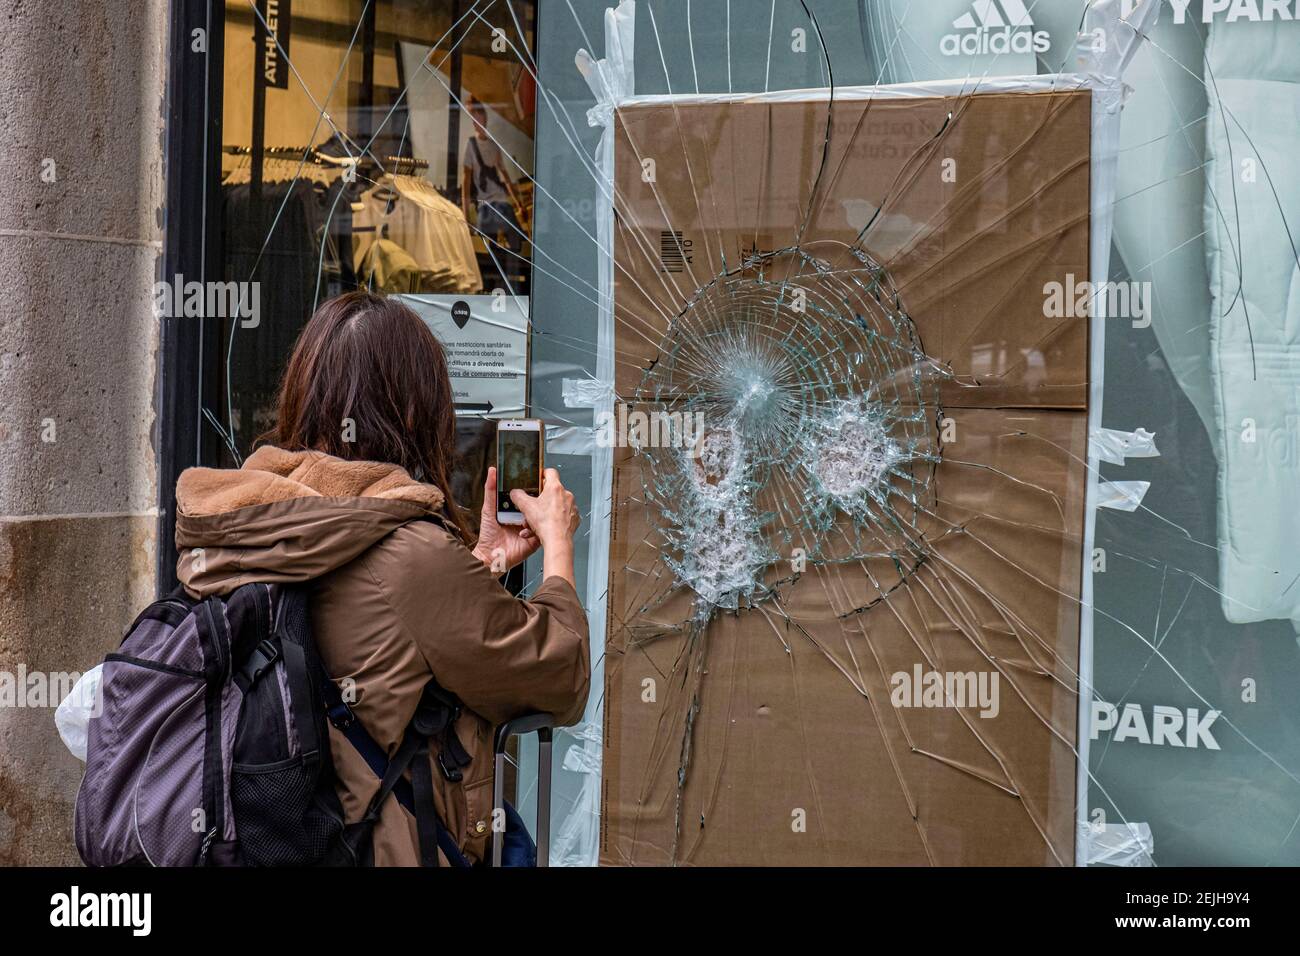 A person is seen taking photos of the damage on Adidas store window in  Passeig de Gràcia.More than 50 stores have suffered damage to their shop  windows and some have been looted